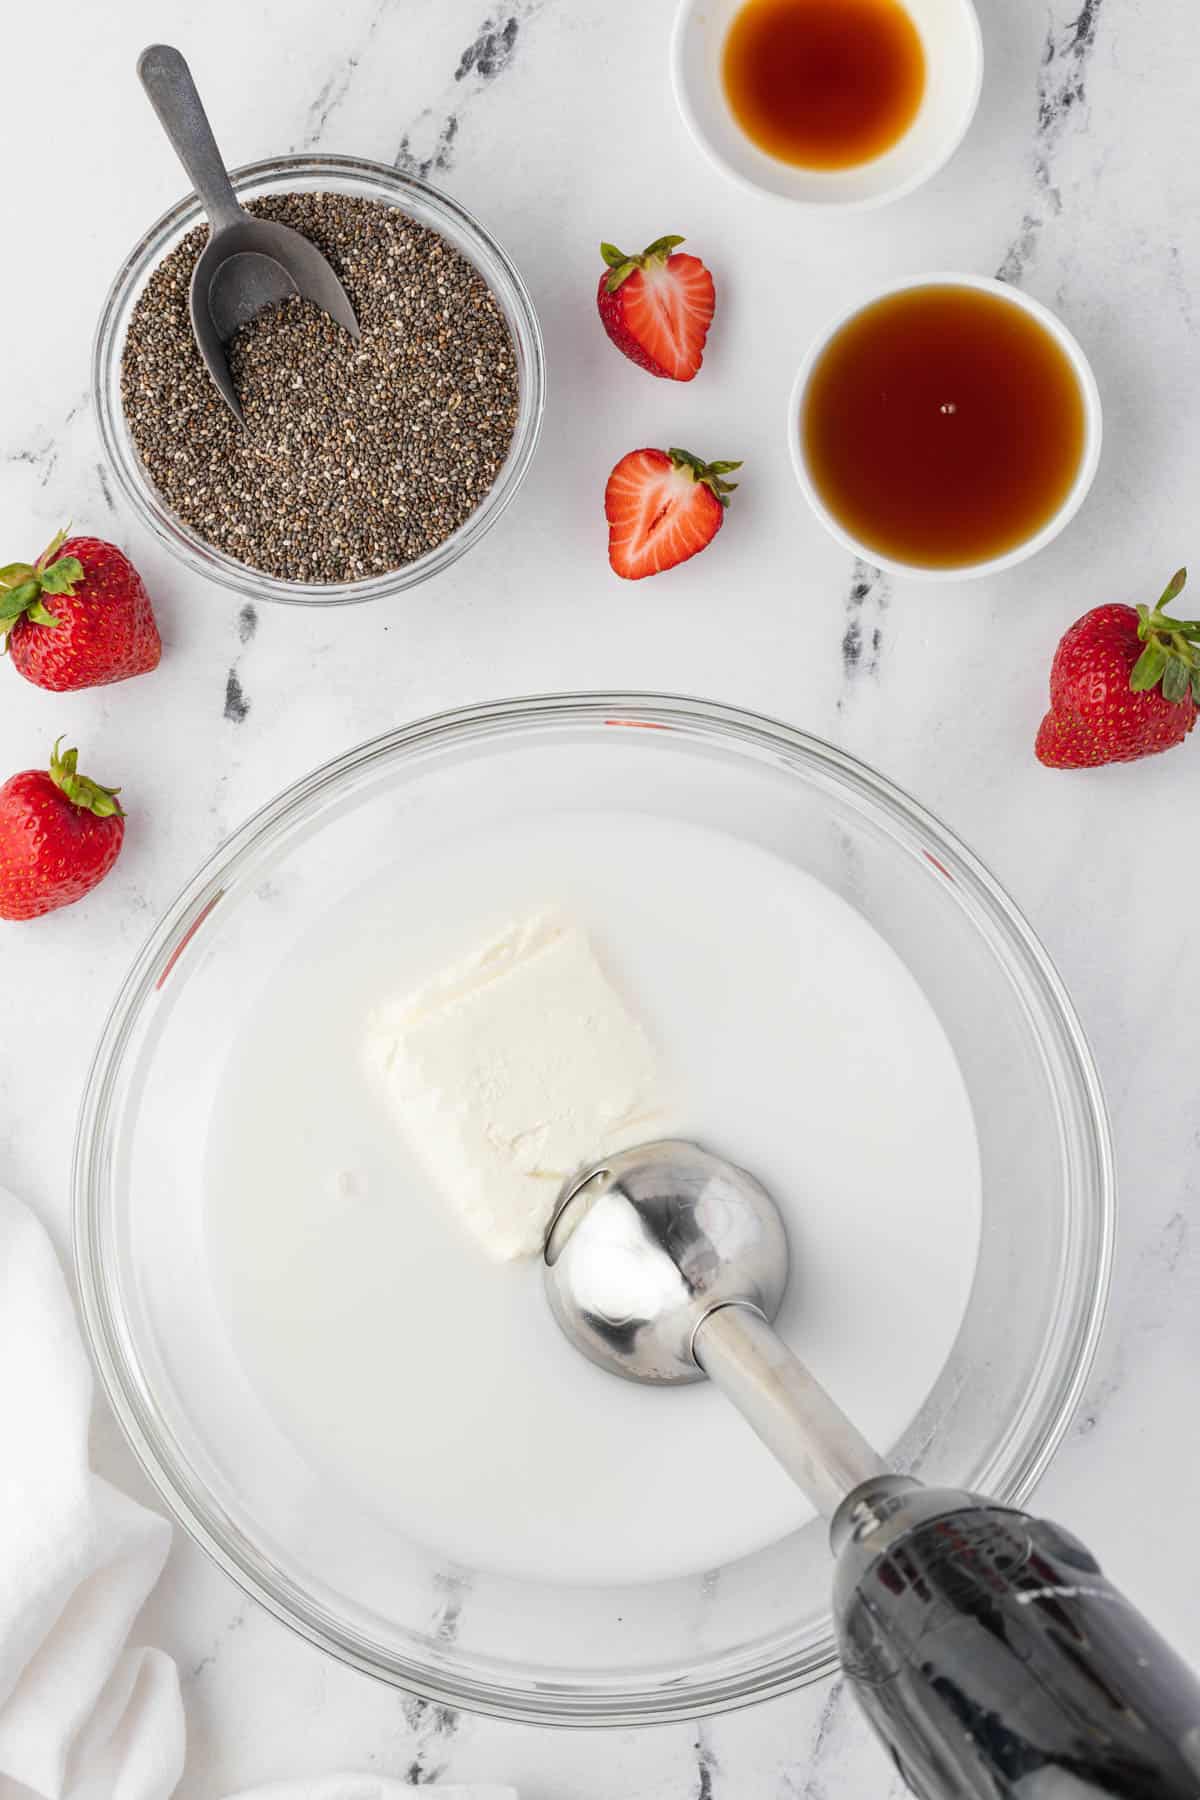 An immersion blender in a bowl of coconut milk with cream cheese next to strawberries and a bowl of chia seeds.